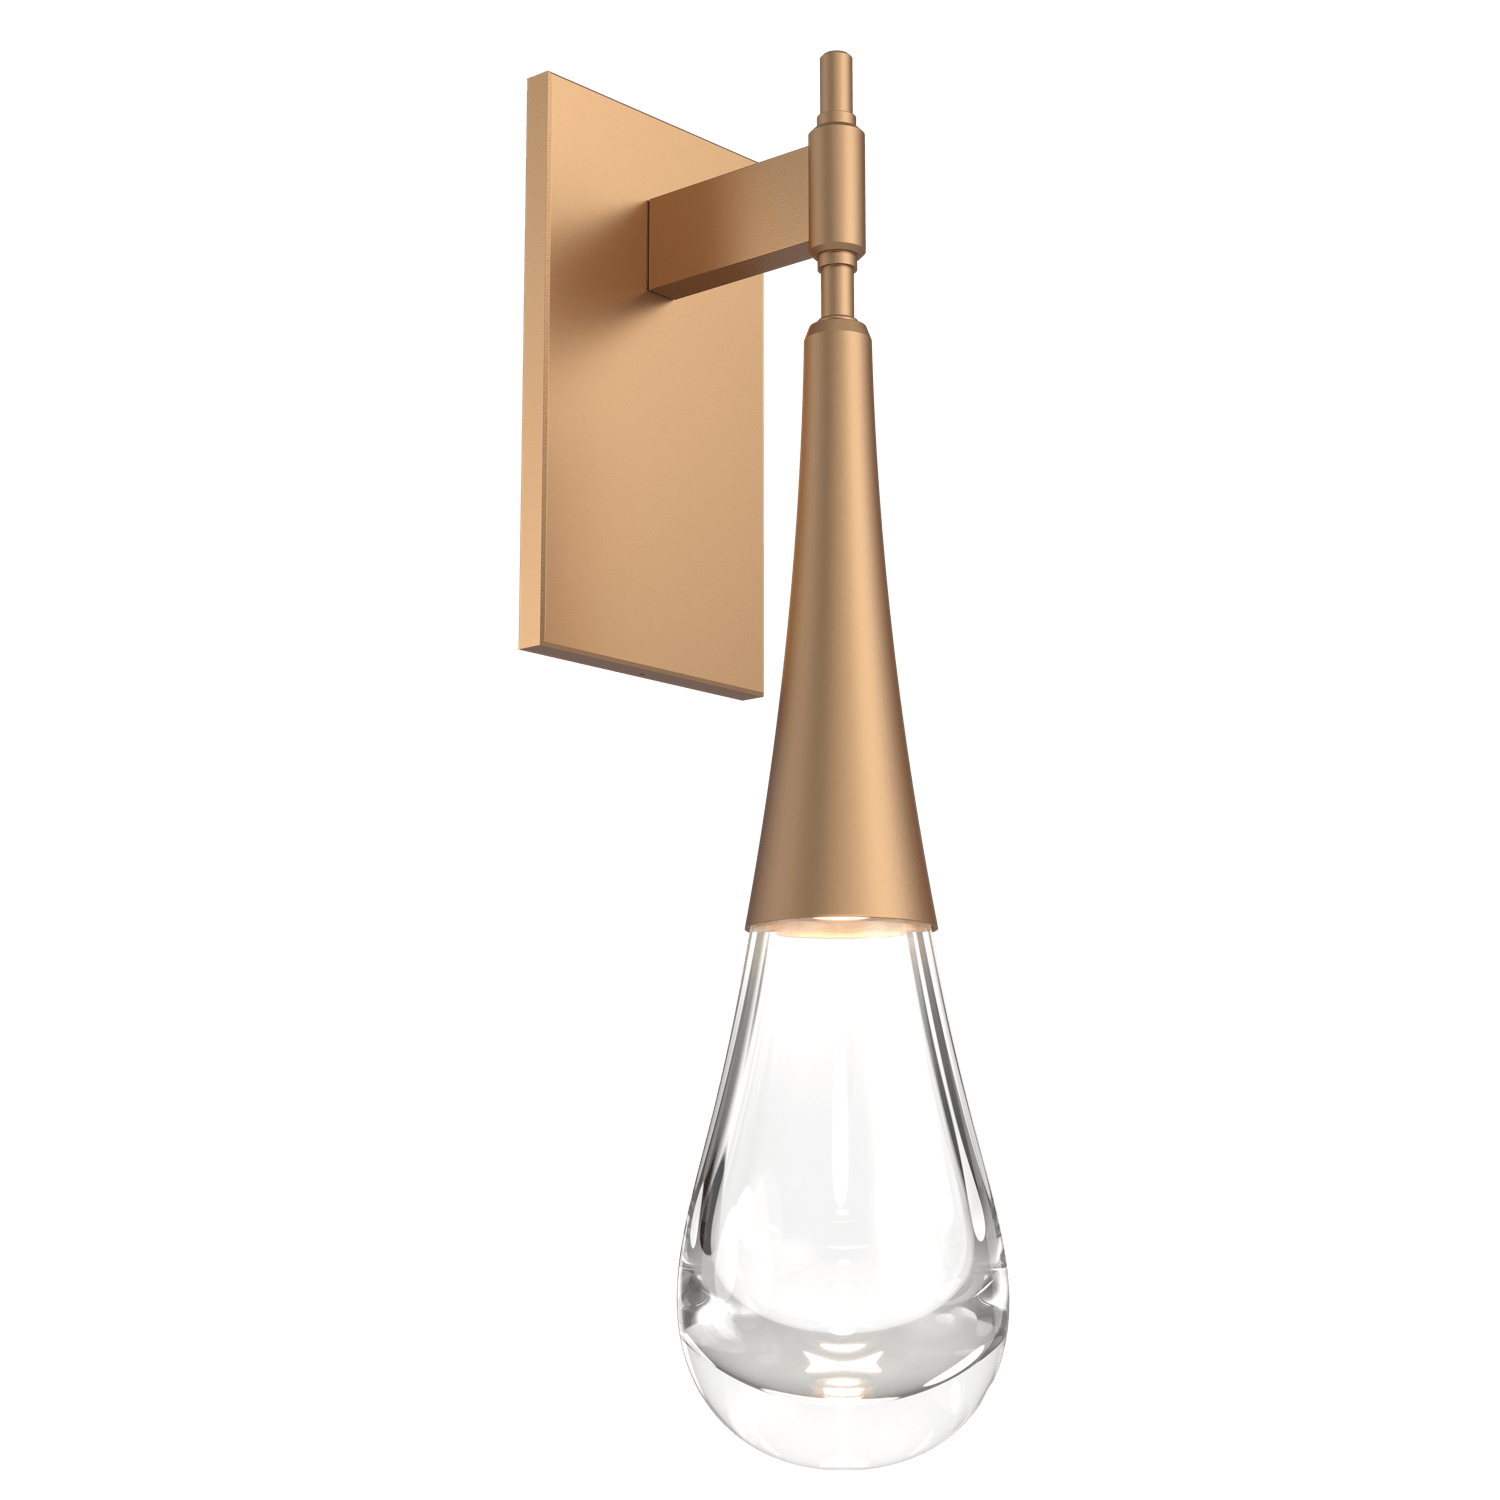 IDB0078-01-NB-Hammerton-Studio-Raindrop-wall-sconce-with-novel-brass-finish-and-clear-blown-glass-shades-and-LED-lamping